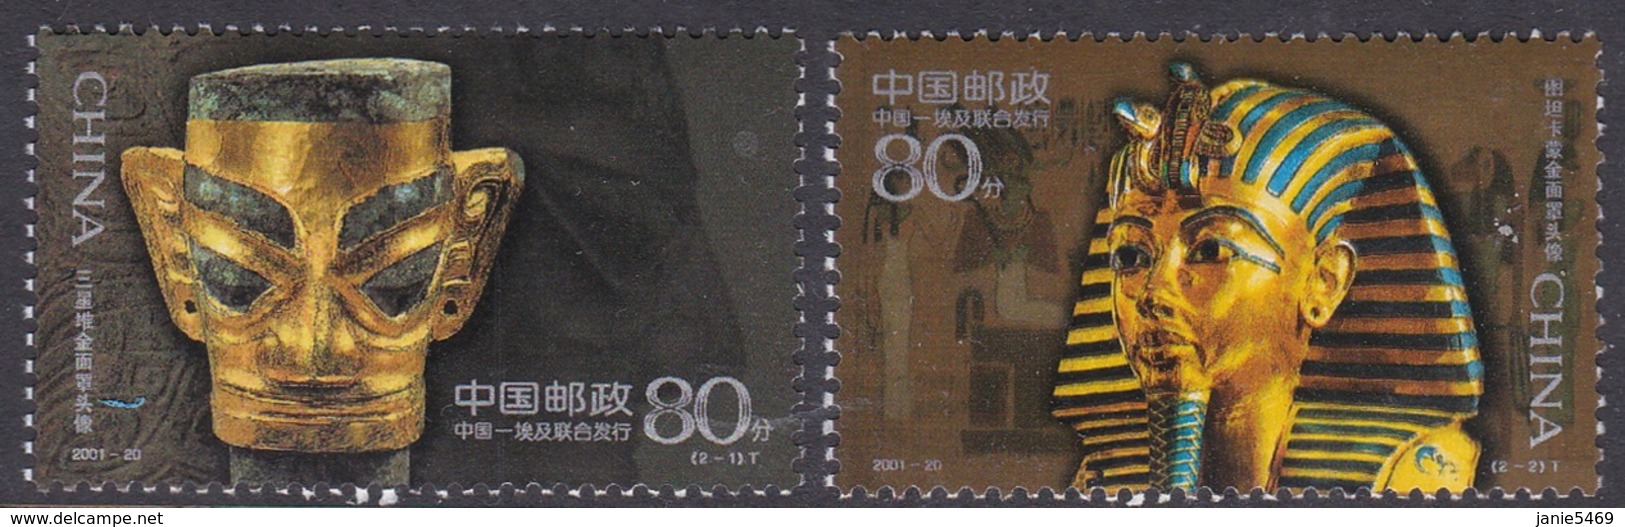 China People's Republic Scott 3141-3142 2001 Gold Masks, Mint Never Hinged - Unused Stamps